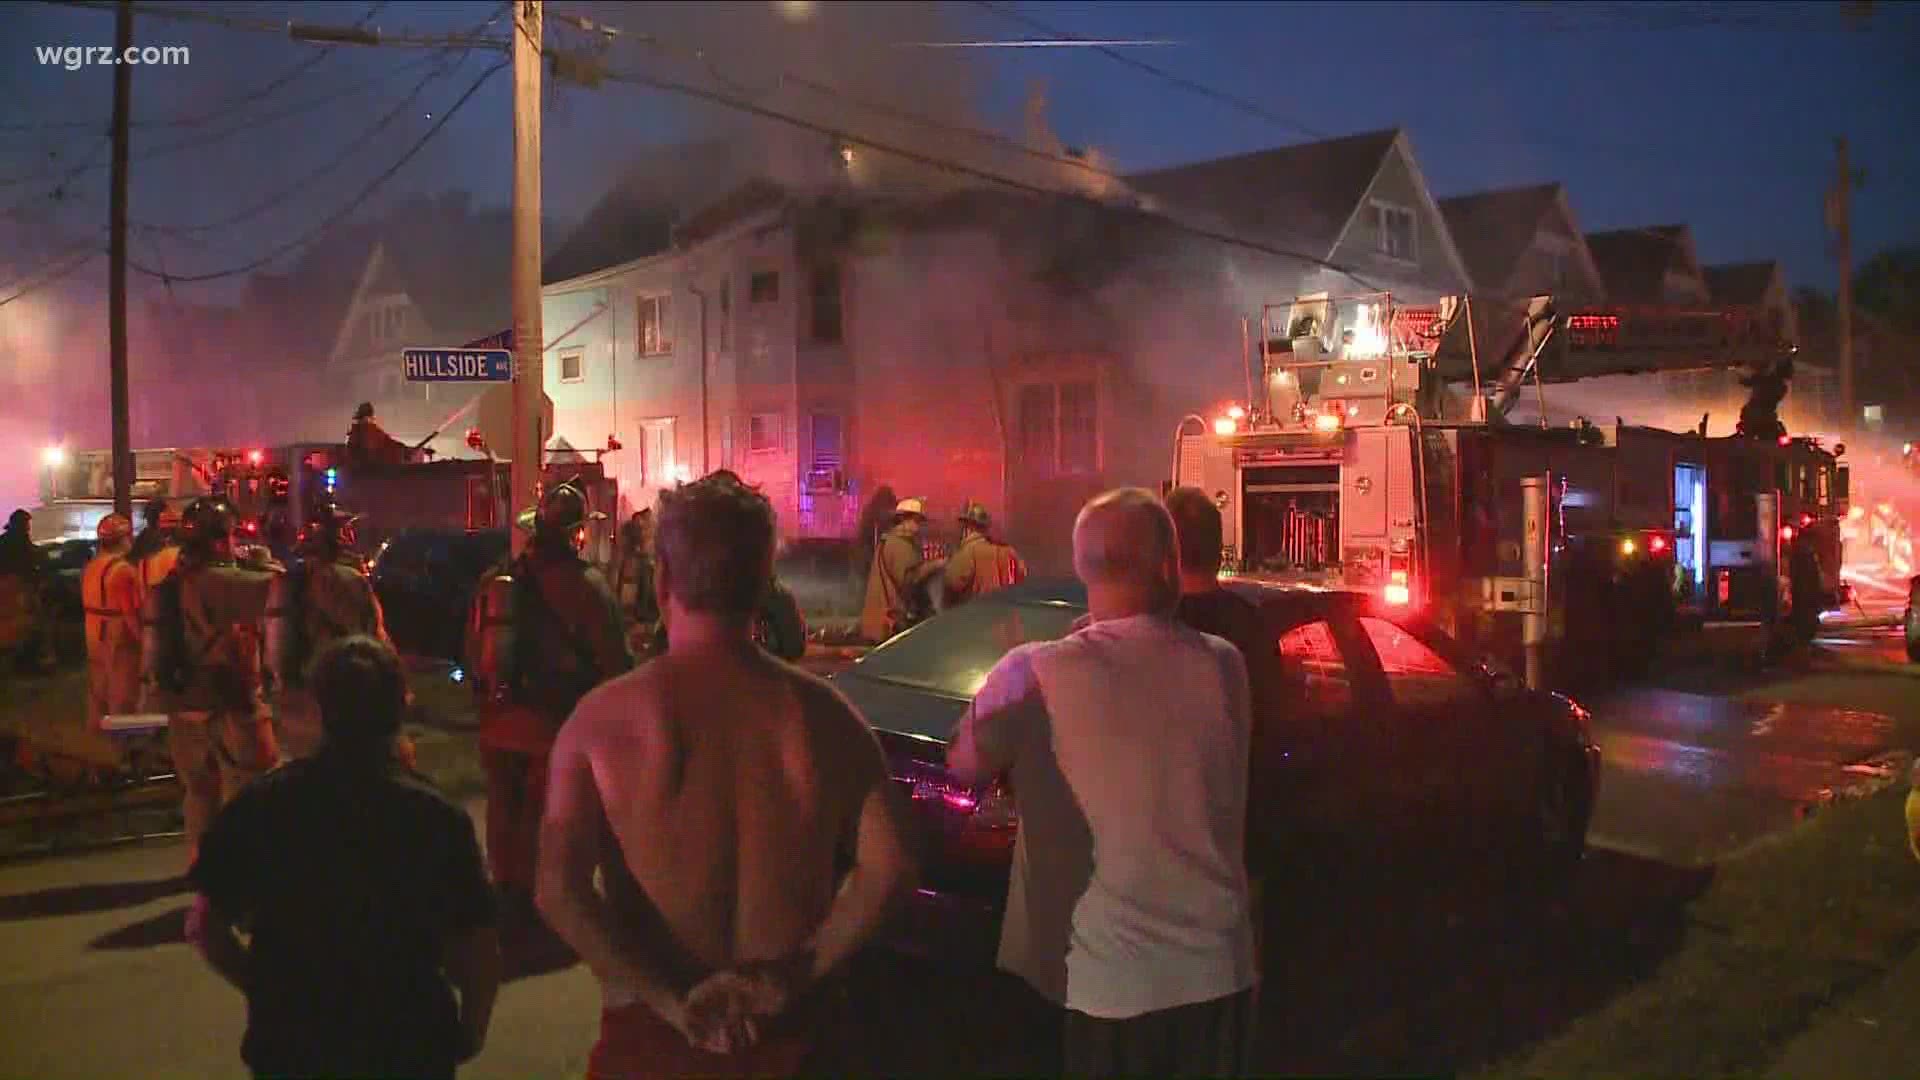 Fireworks suspected in South Buffalo house fire